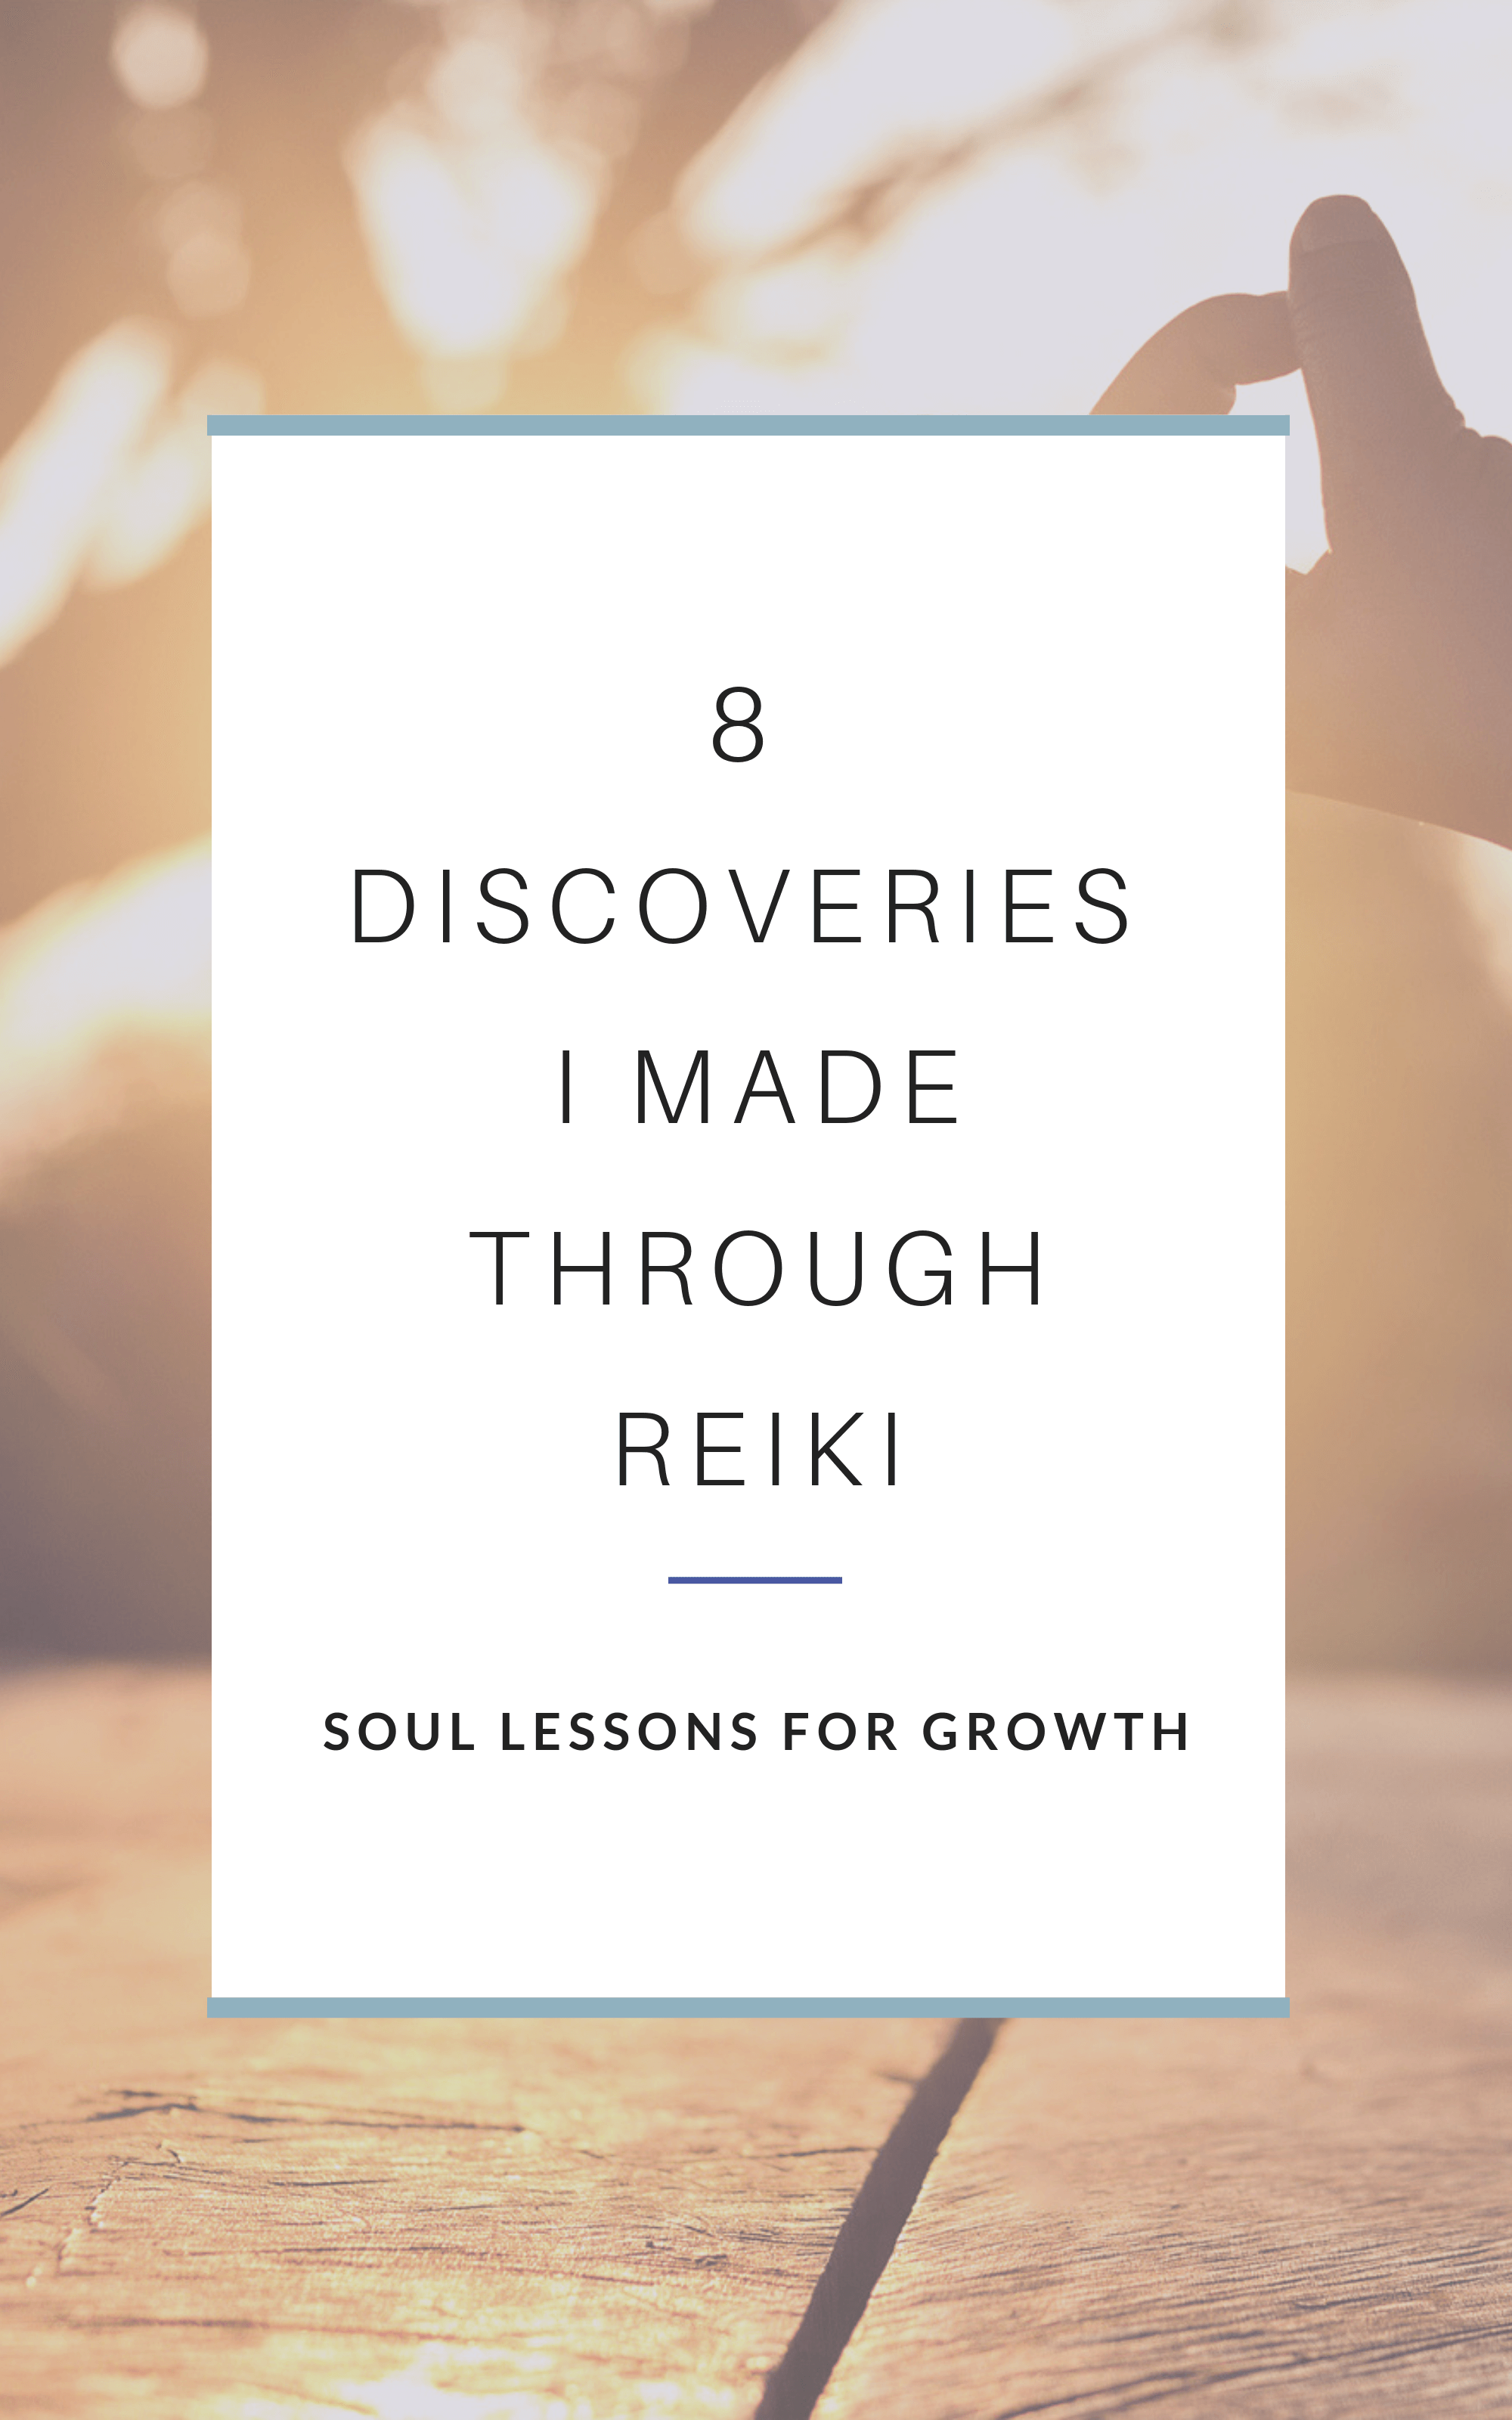 Reiki Lessons - What I Learned from Reiki